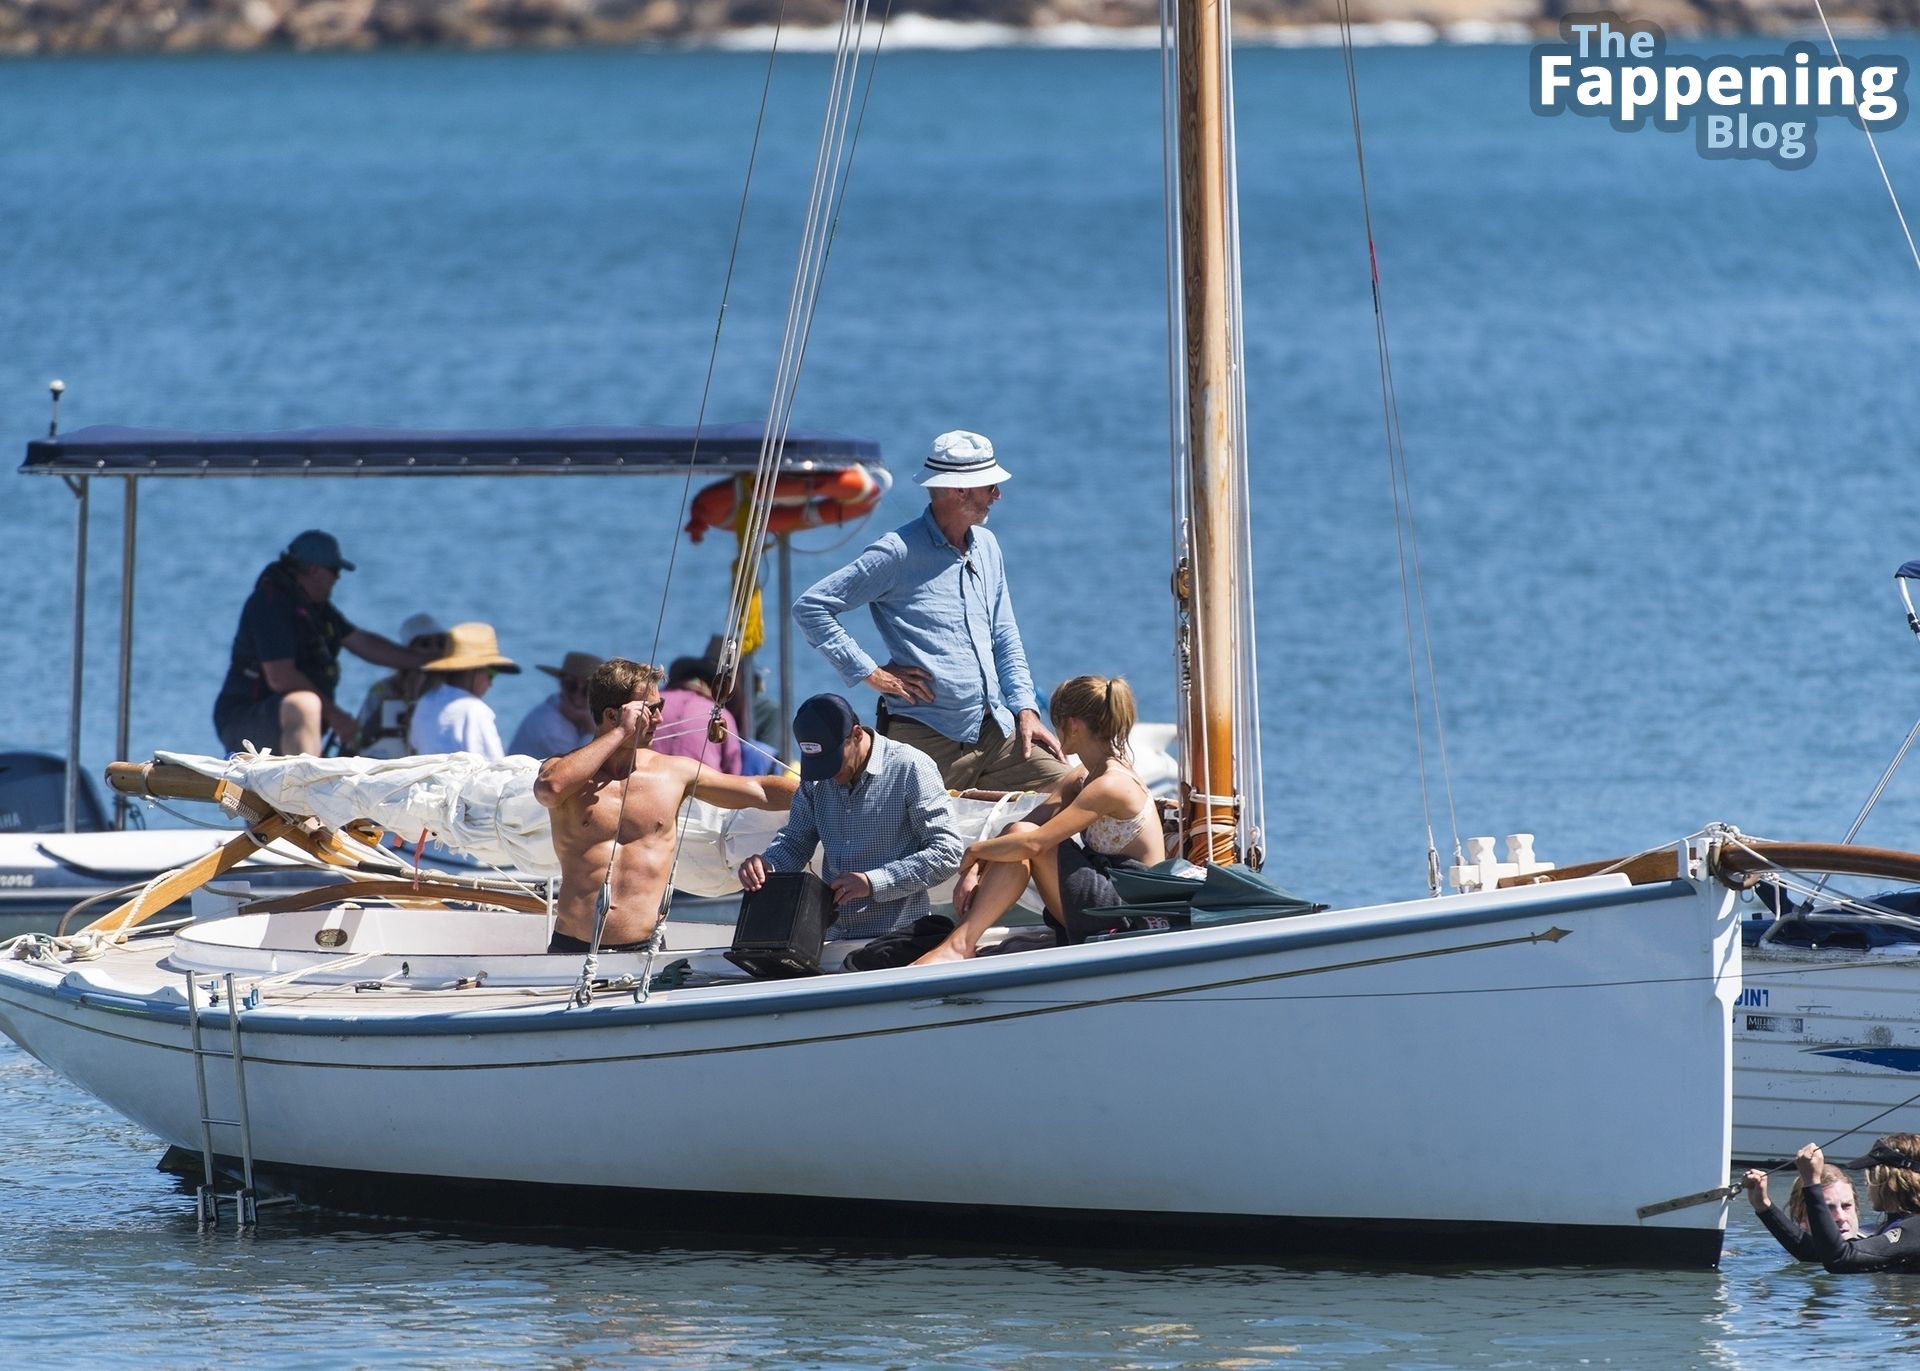 Sydney Sweeney &amp; Glen Powell Swim Out to a Yacht Filming a New Movie in Sydney (144 Photos)